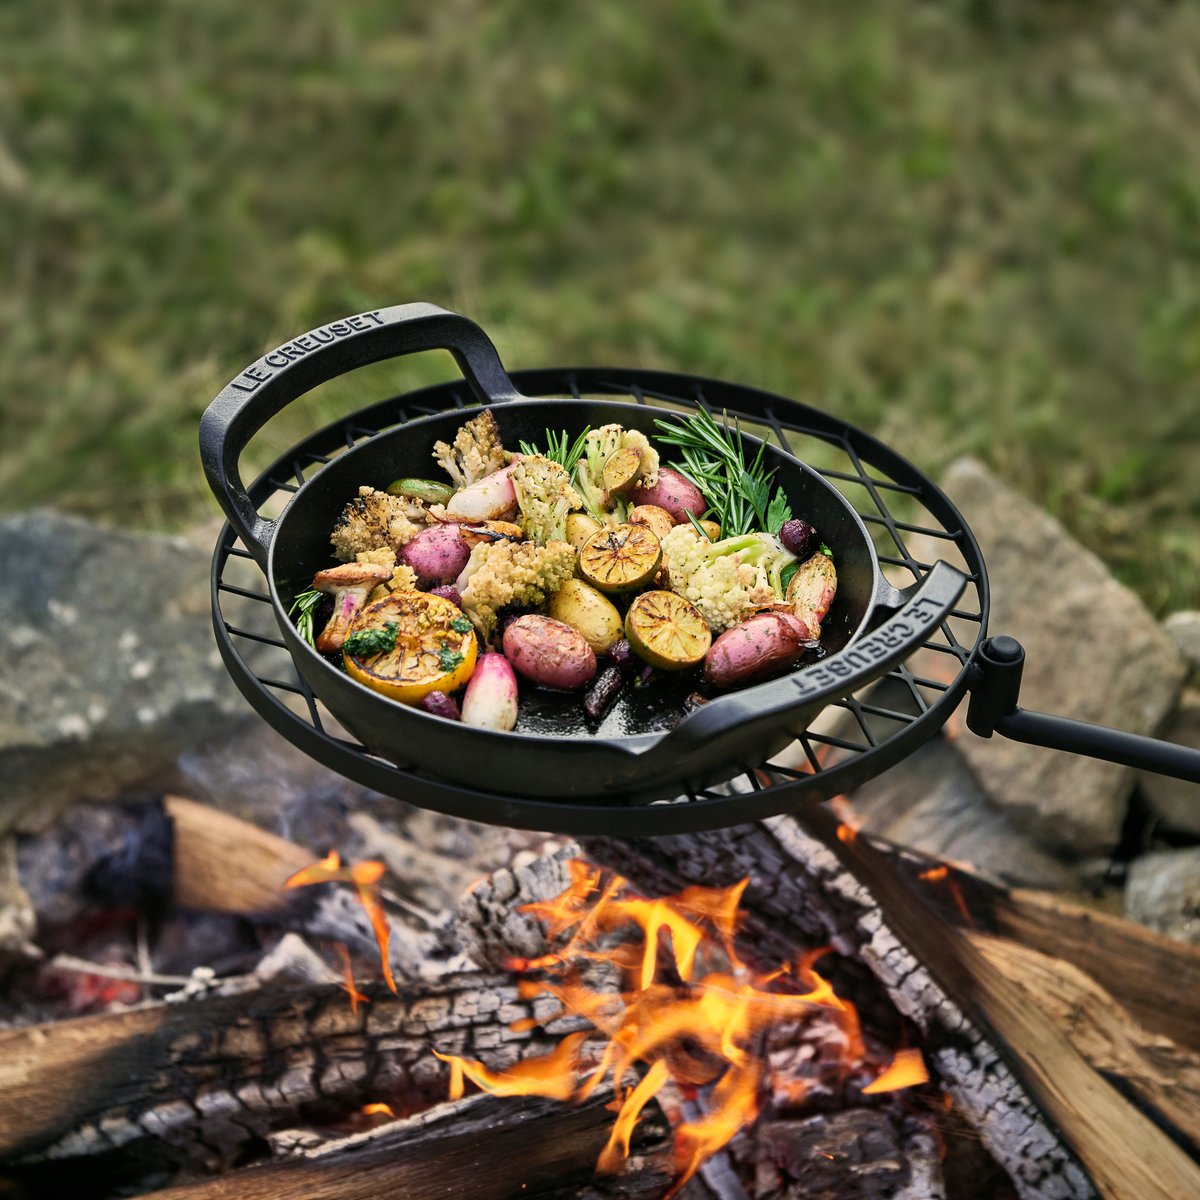 For the first time, experience our legendary performance... outside. ⛰️ Fully coated in a rugged matte black enamel, the new Alpine Outdoor Collection is an invitation to bring the sophistication and quality of Le Creuset outdoors. Learn more: bit.ly/49s6Ndp